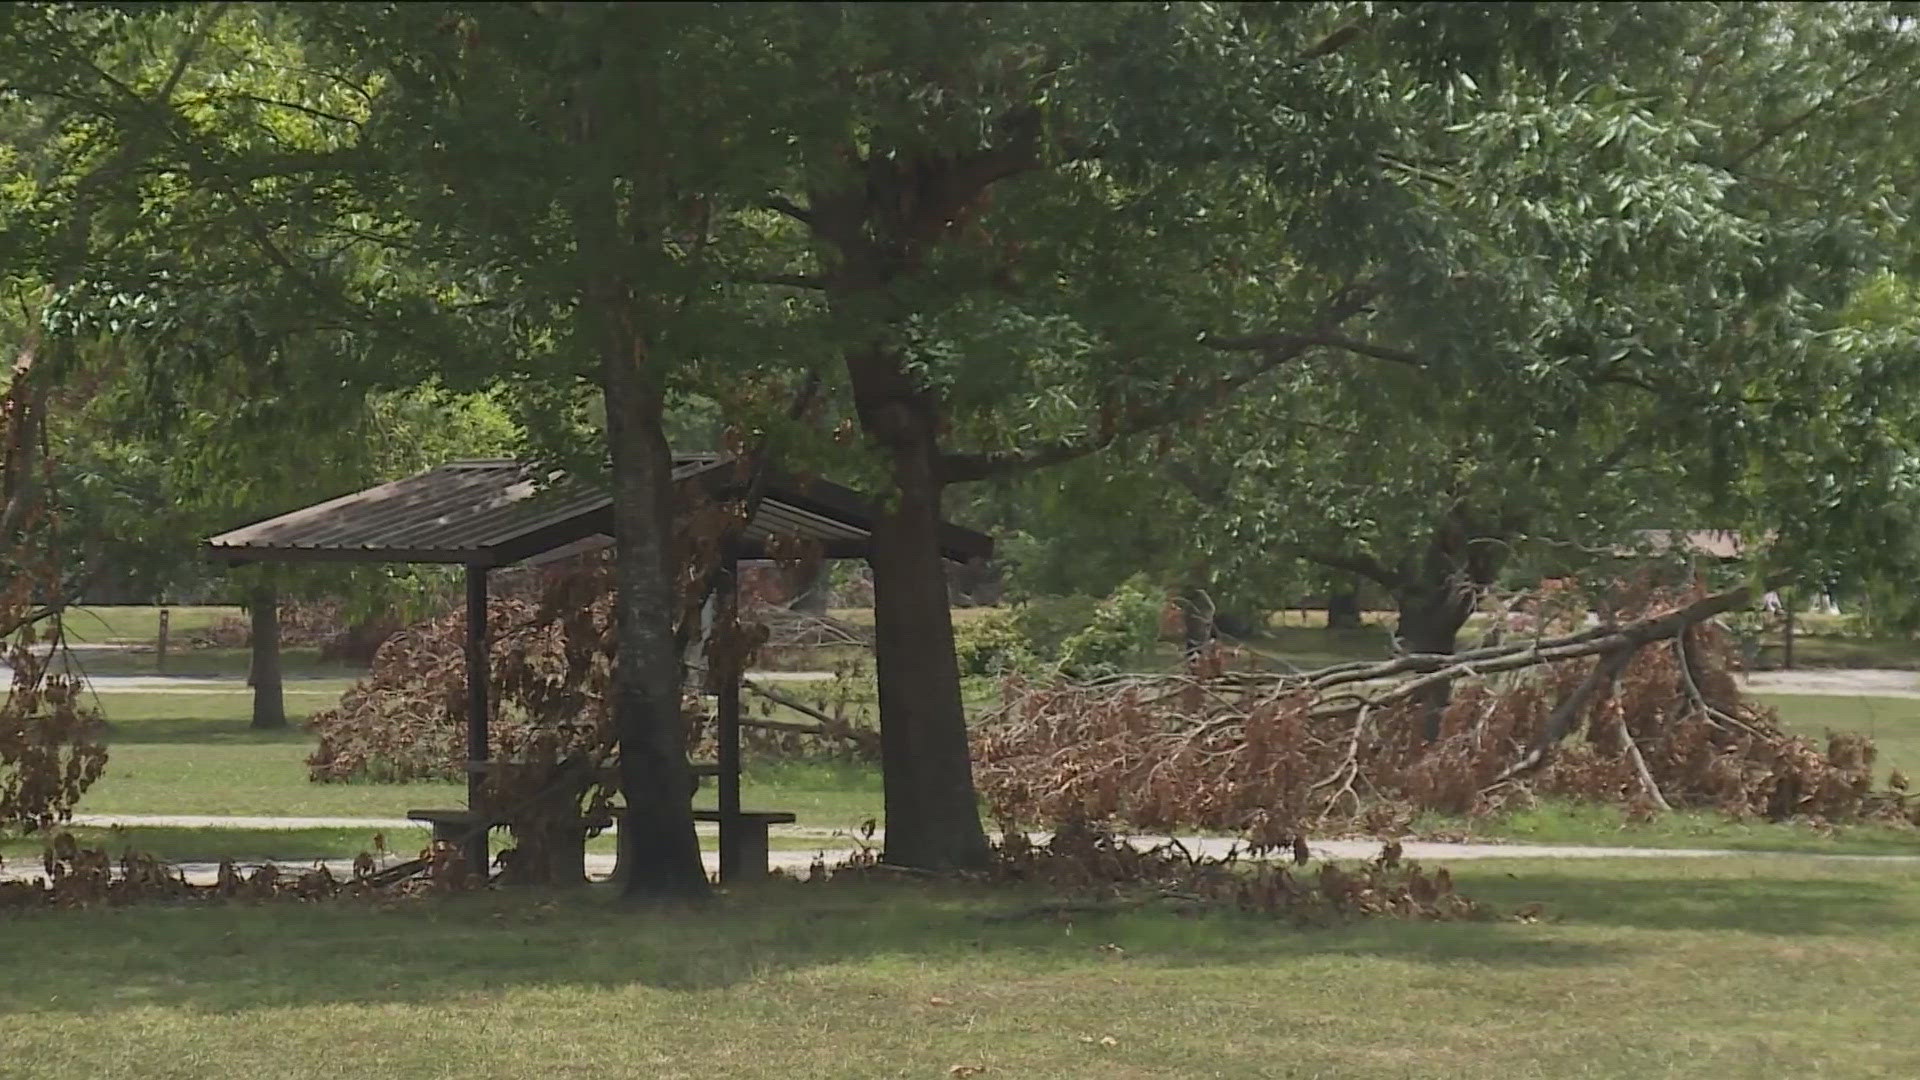 The campground was initially closed after the recent tornadoes left behind extensive debris.